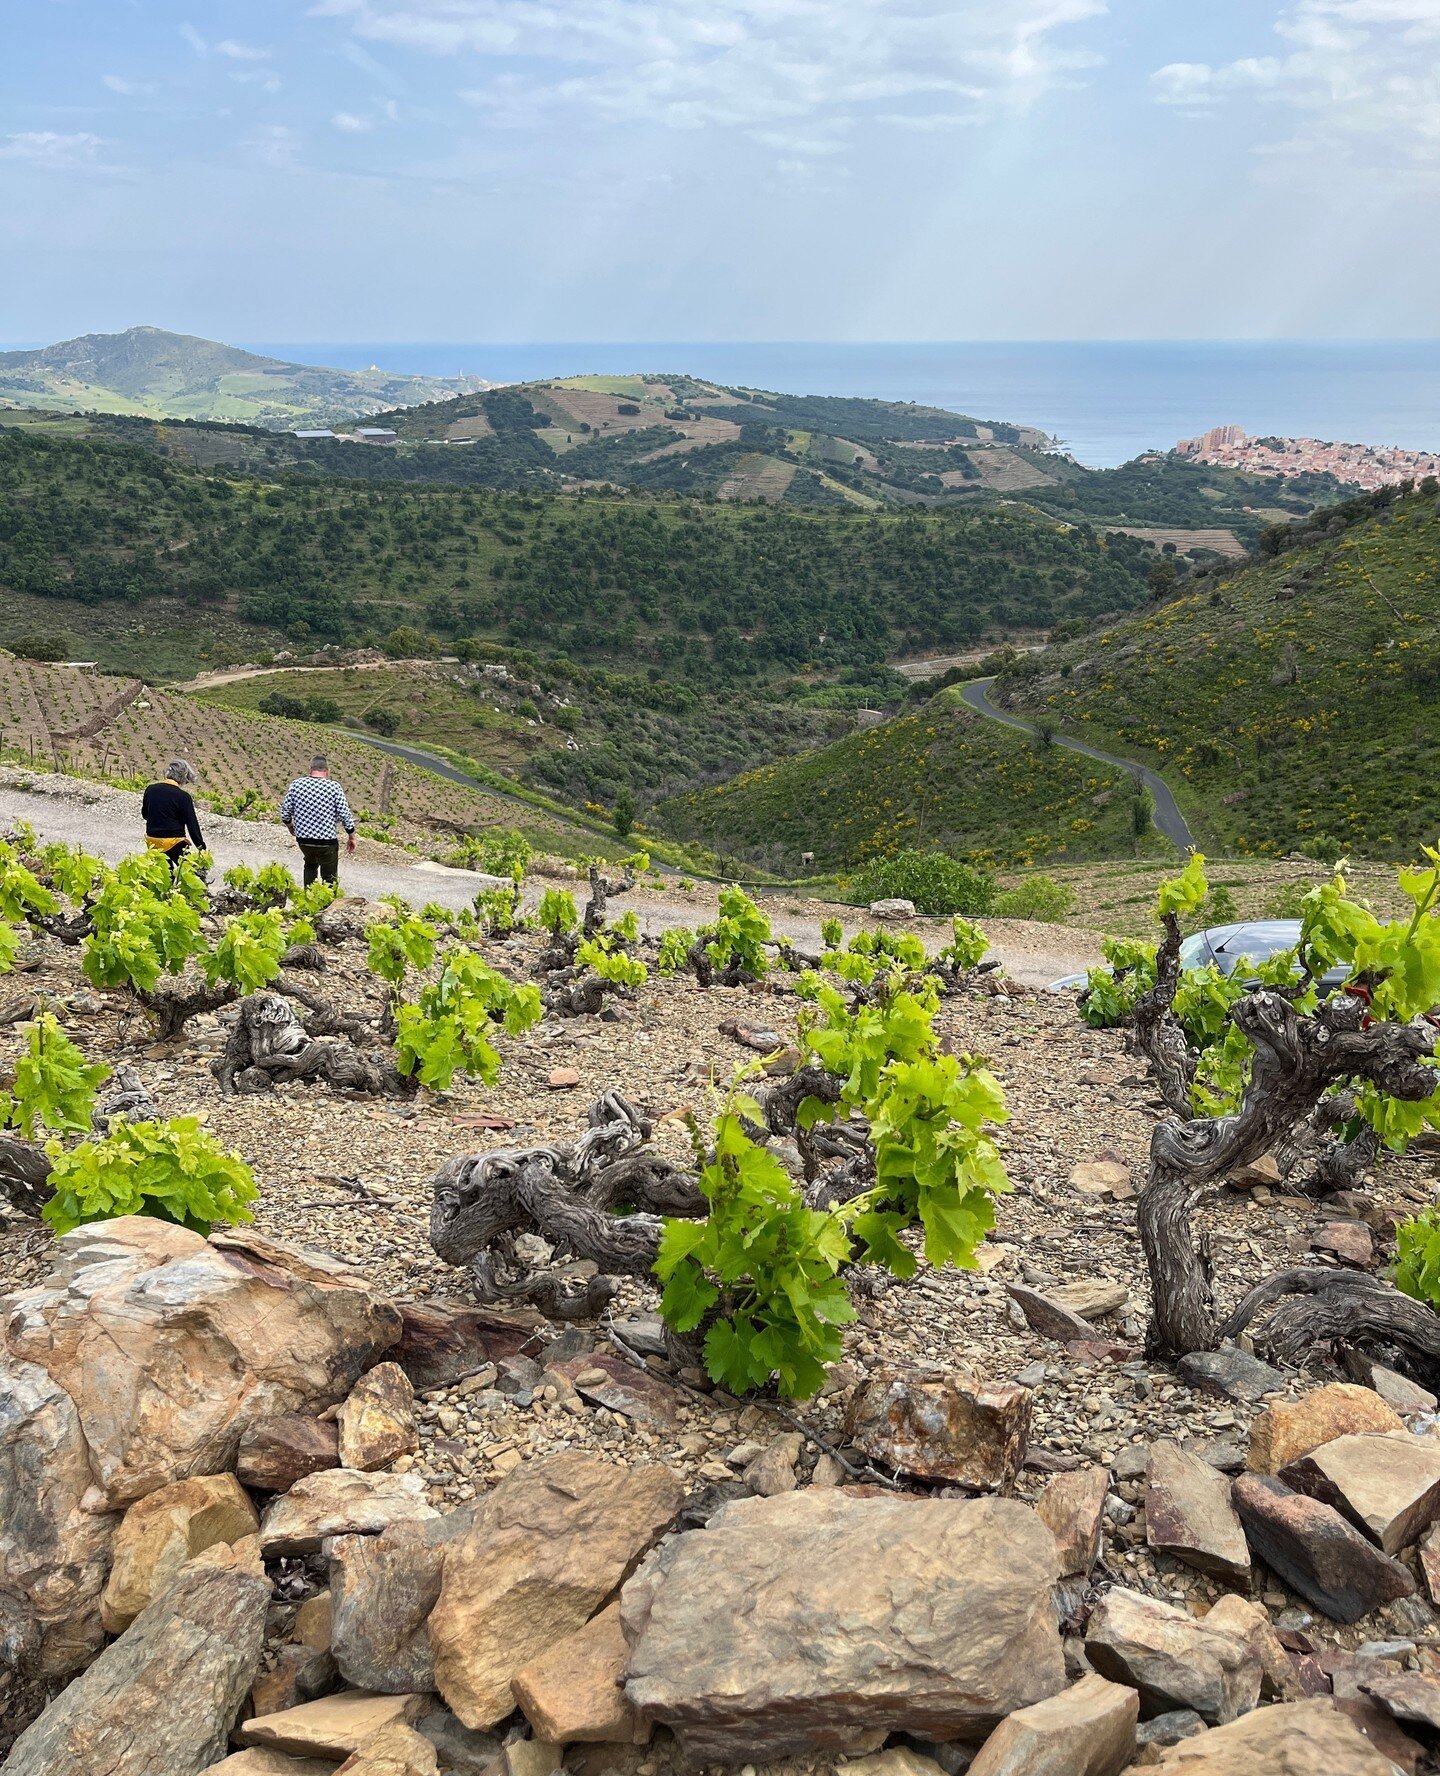 📣 Introducing Coume del Mas Banyuls - Gorgeous 'vin doux naturel'. ⁠
⁠
Offer out to Trade today.⁠
⁠
Situated in the very south of the Roussillon, bordering Catalan Spain, is a stretch of stunning, jagged coastline known as the C&ocirc;te Vermeille. 